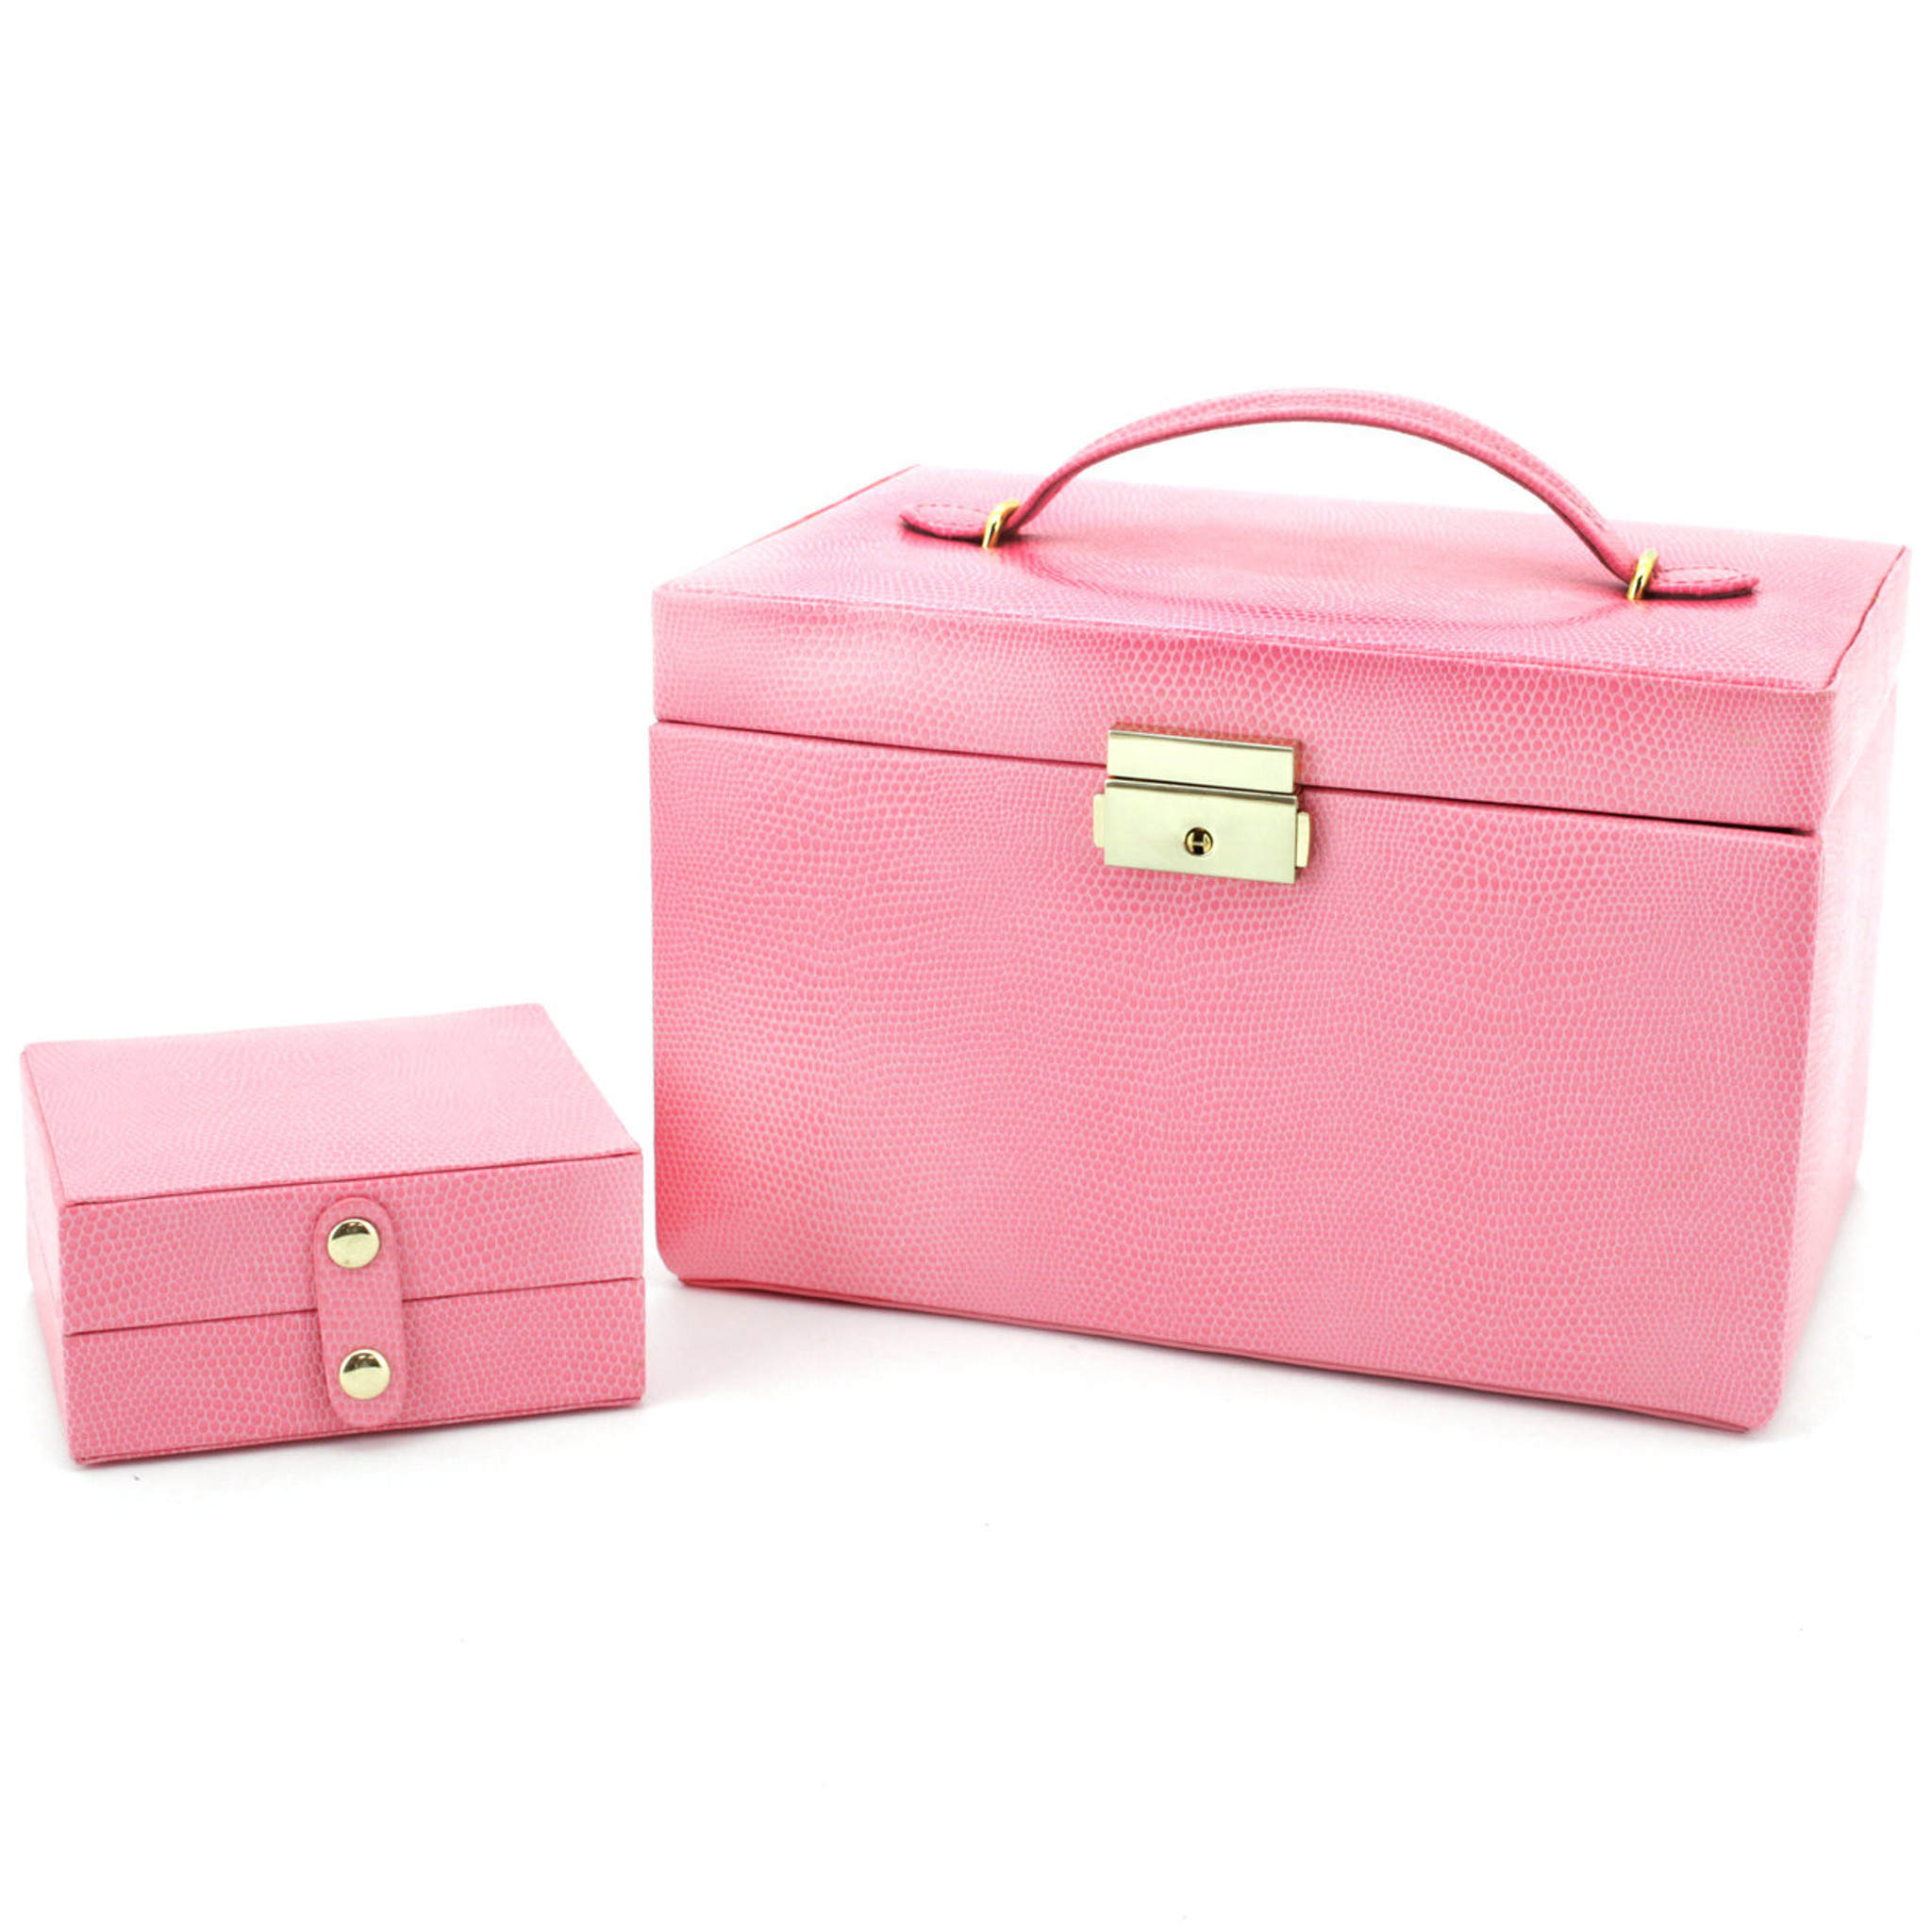 Jewelry Box with Travel Case - Pink